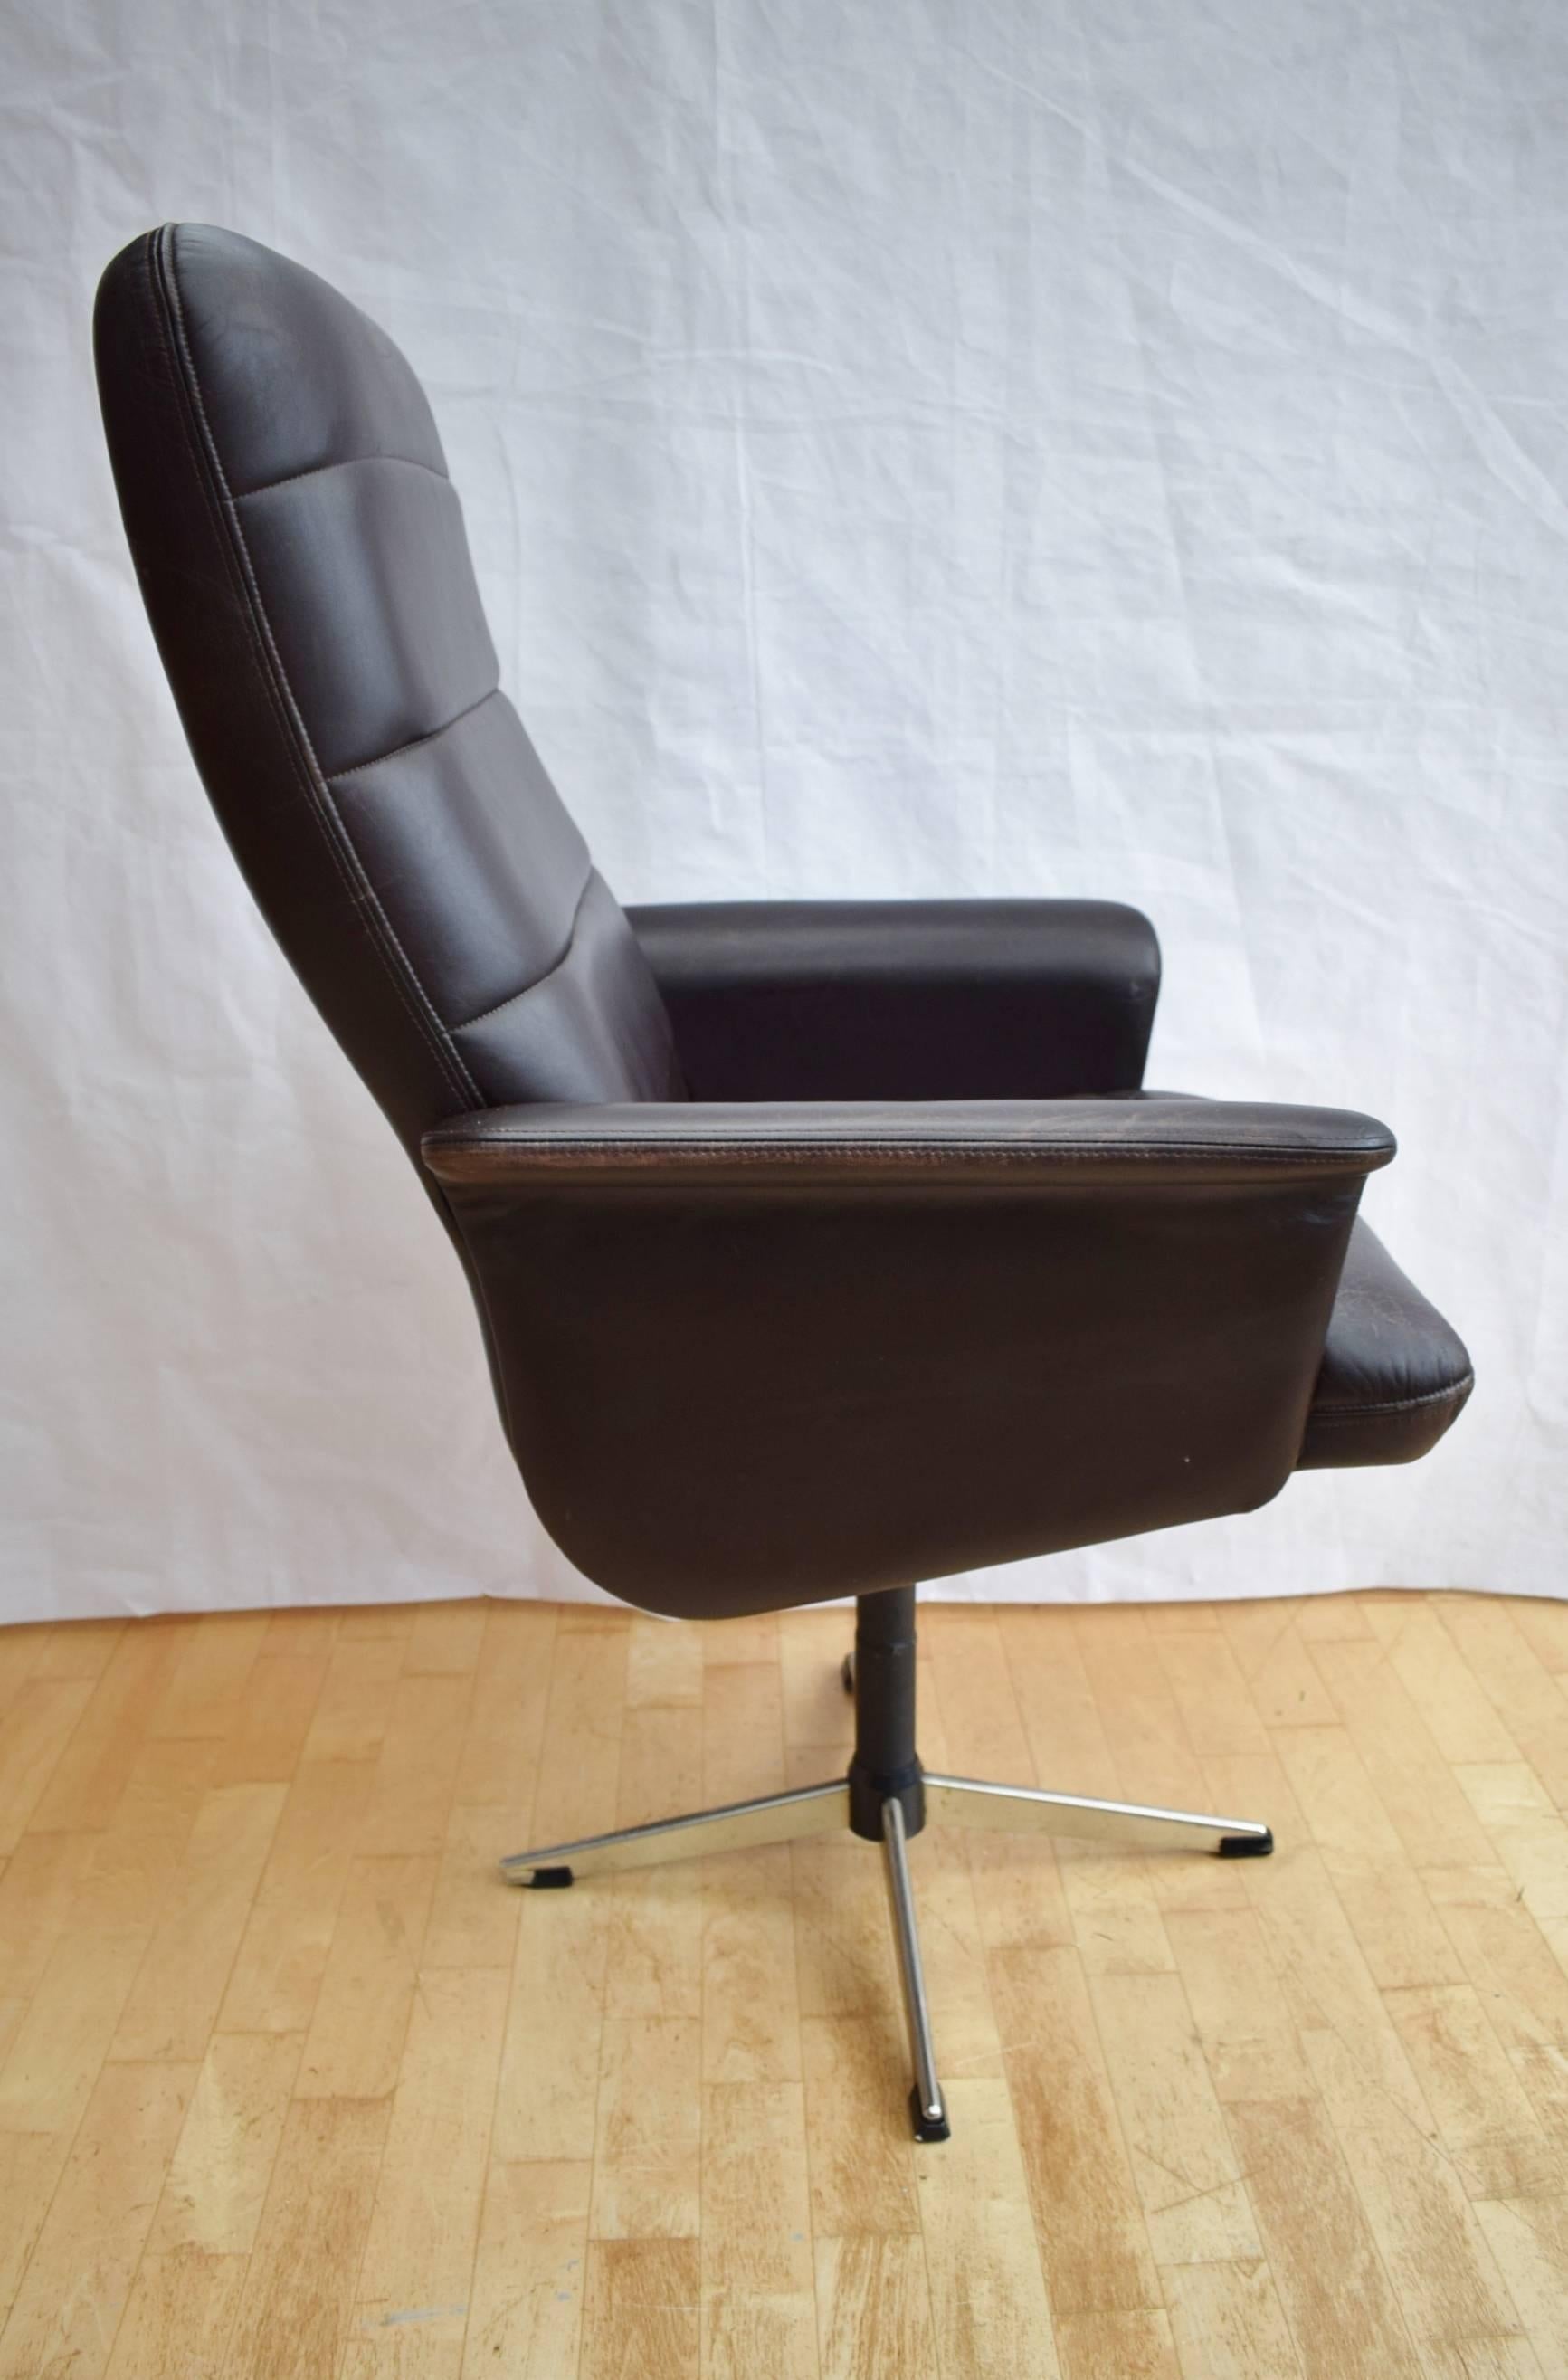 Designer: Danish design

Manufacturer: Komfort

Country: Denmark

Date: 1970s

Material: Dark brown leather and tubular swivel chrome base.

Maximum dimensions: 72cm wide , 63cm deep , and 113cm tall.

Seat height 56cm

Condition: